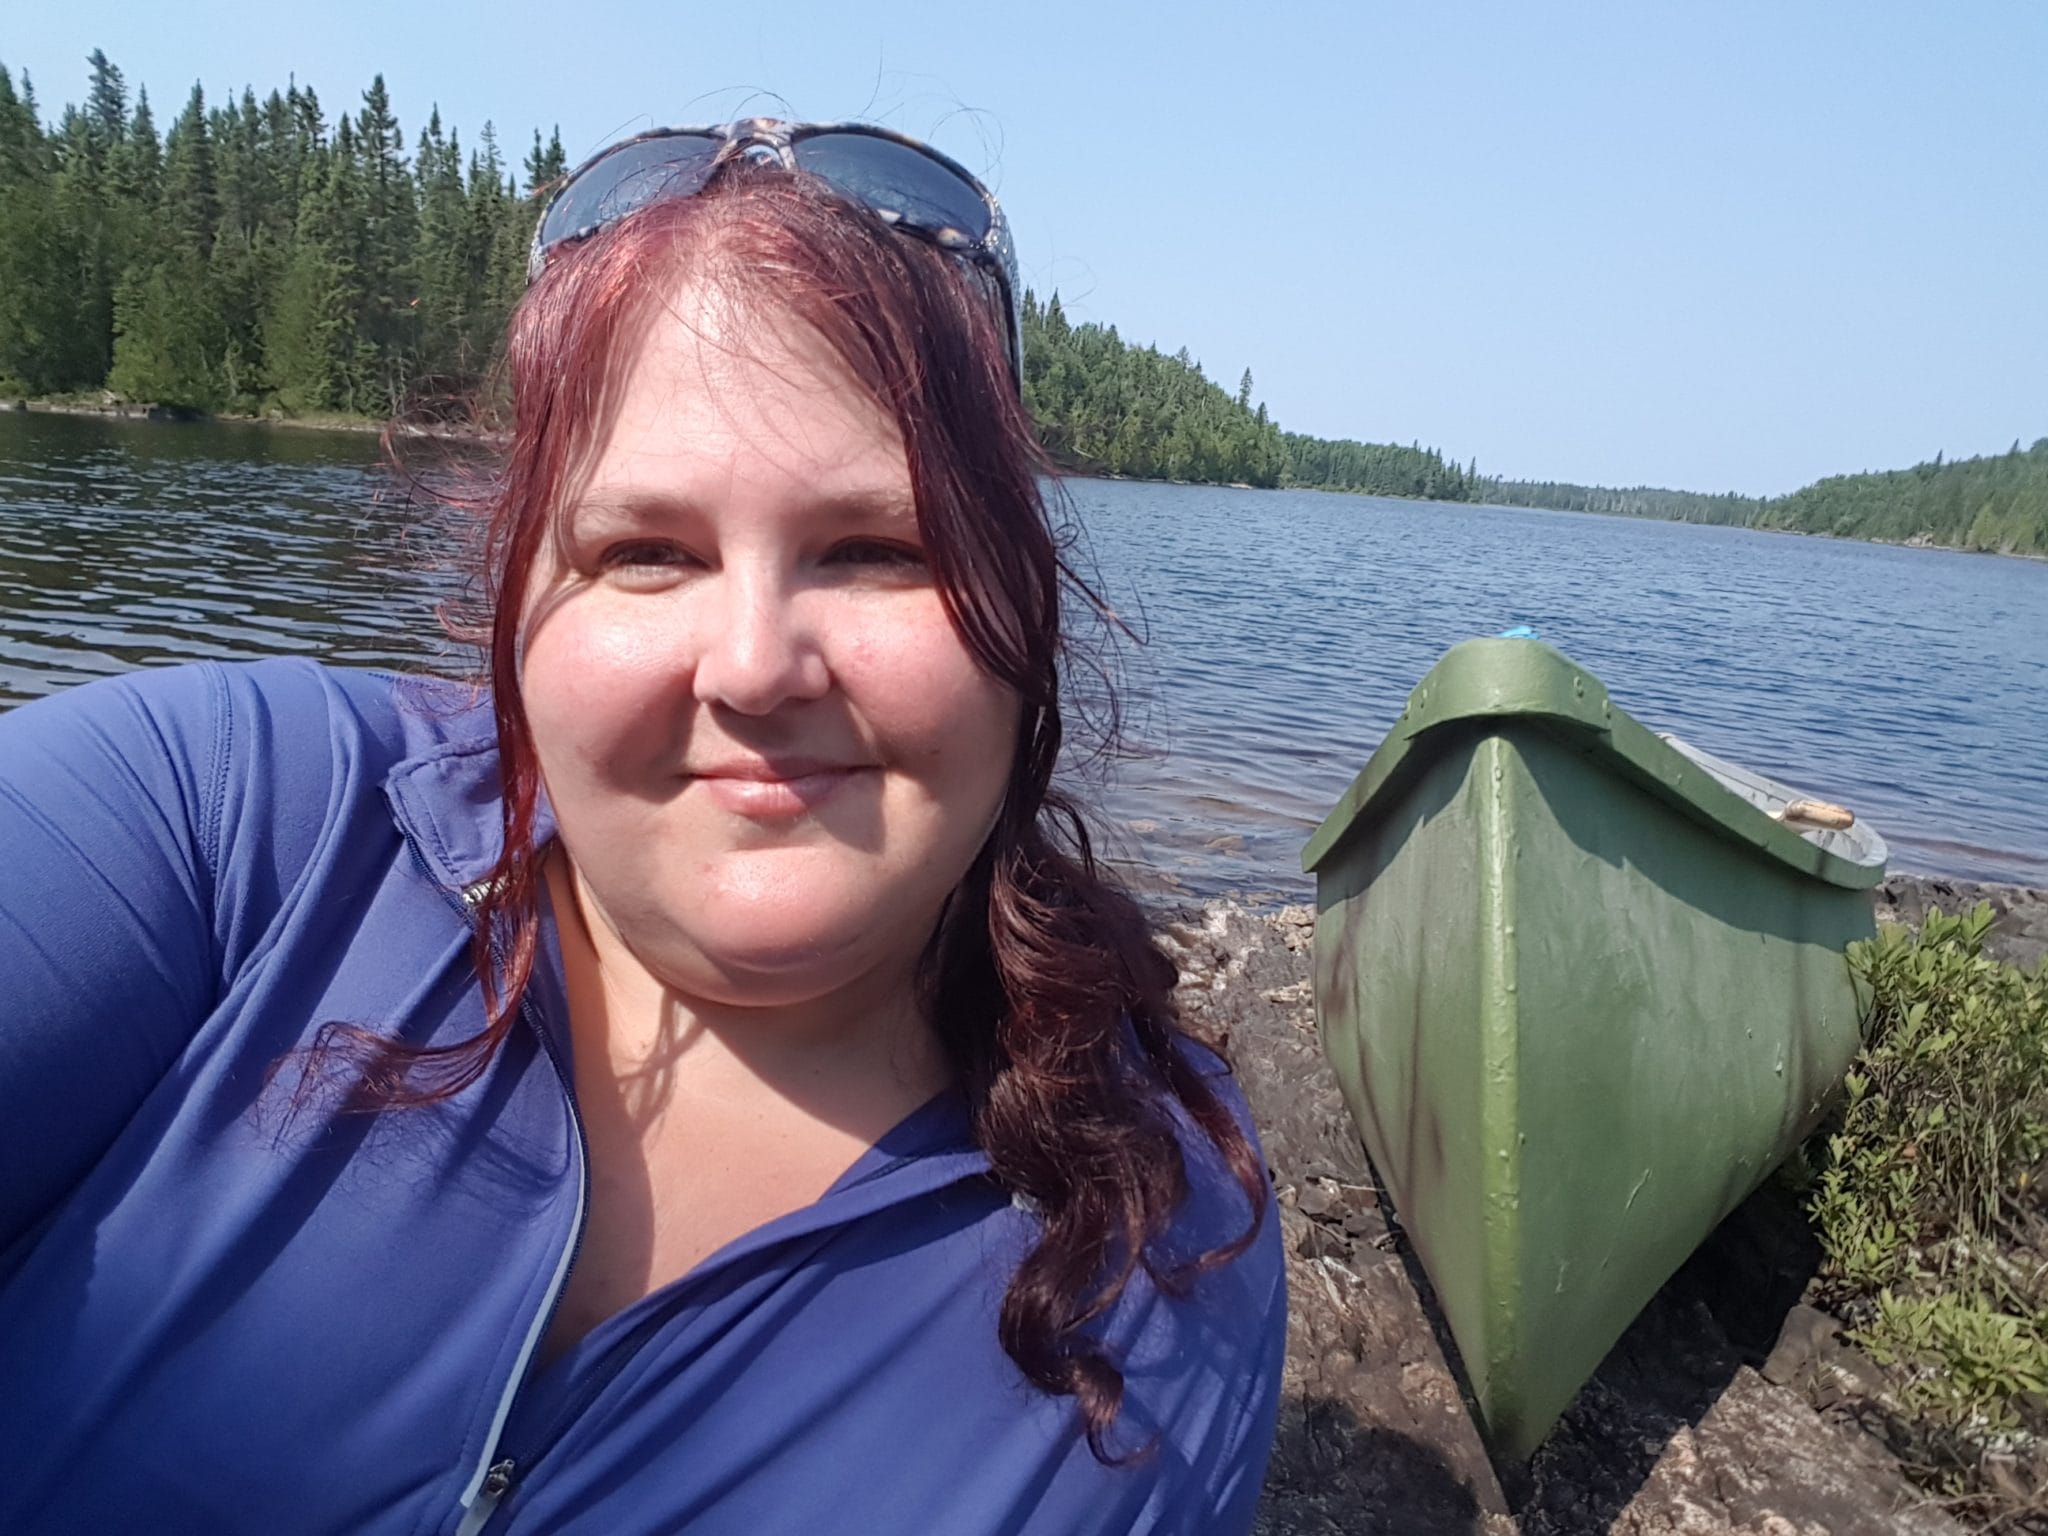 A woman with red hair and sunglasses on her head smiling at the camera, by a lake with a green canoe nearby.